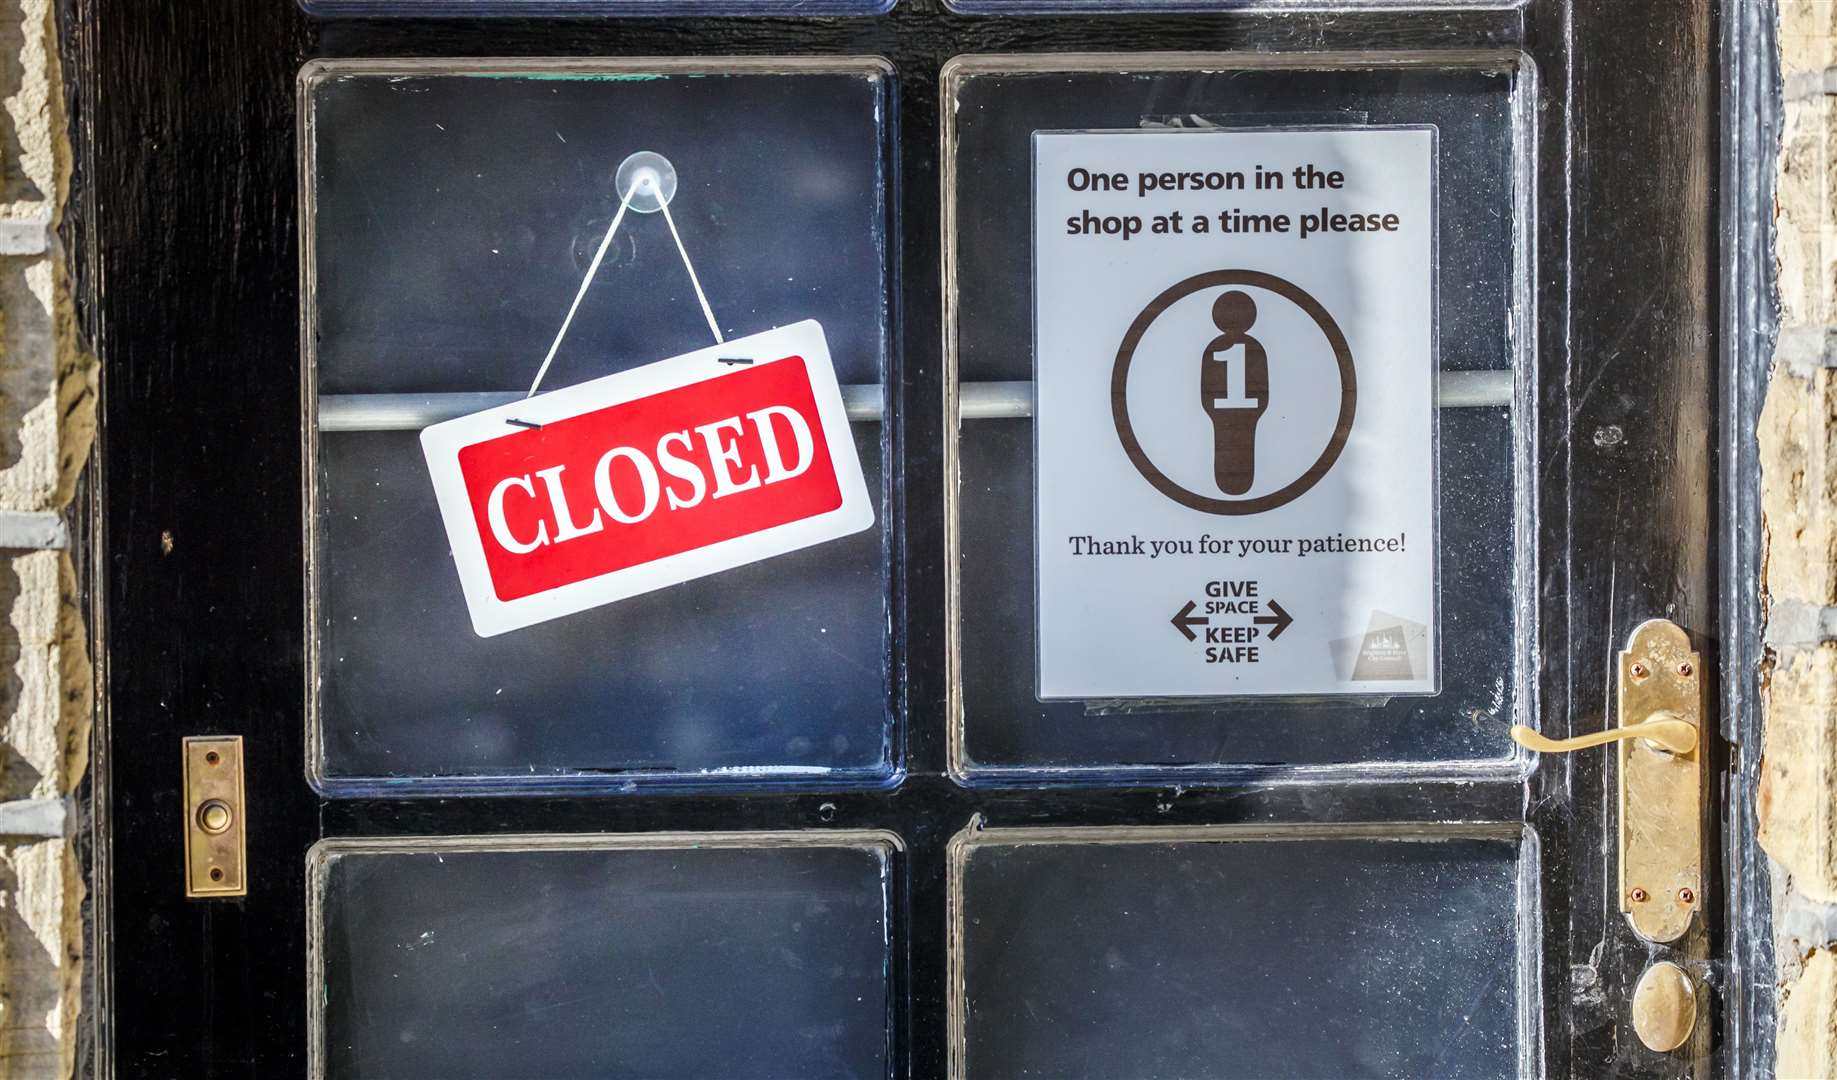 A closed sign next to a social distancing sign in a shop window in Haworth, West Yorkshire (Danny Lawson/PA)